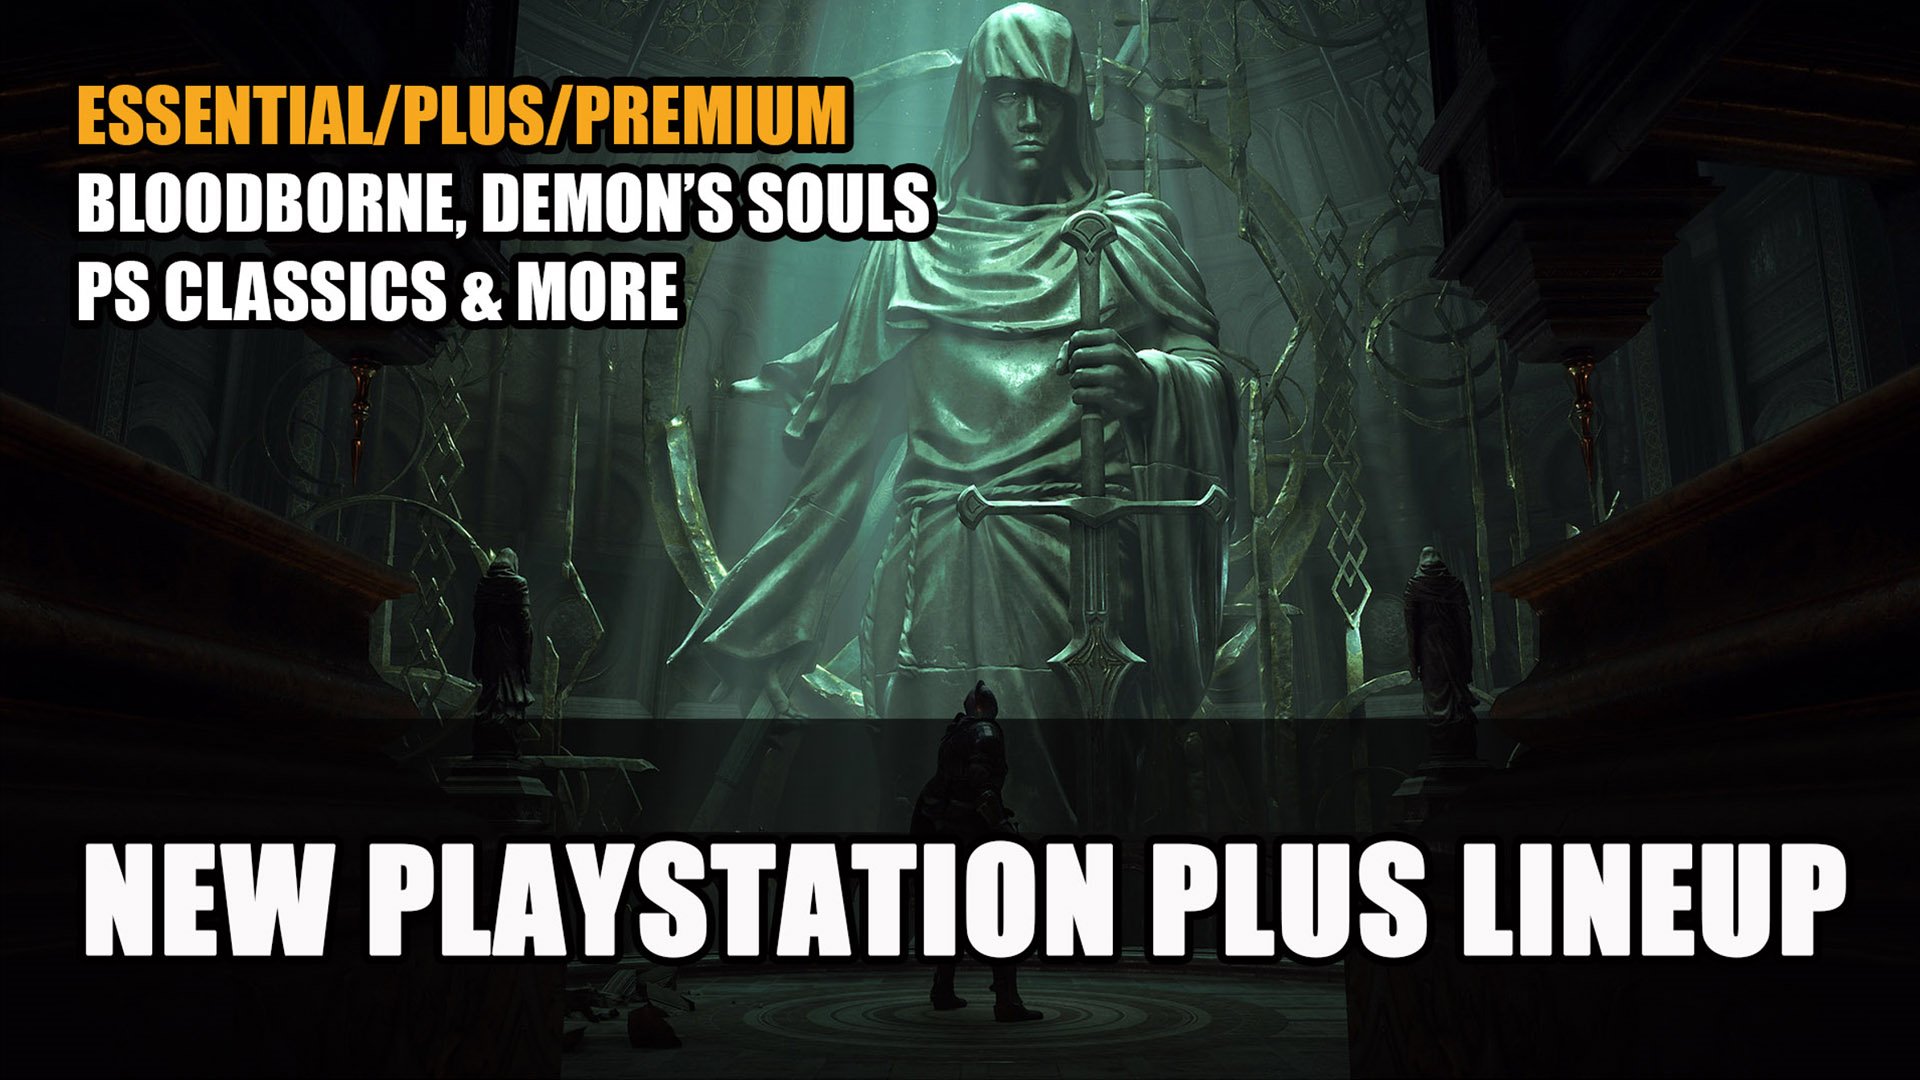 Demon's Souls remake devs Bluepoint Games acquired by PlayStation Studios